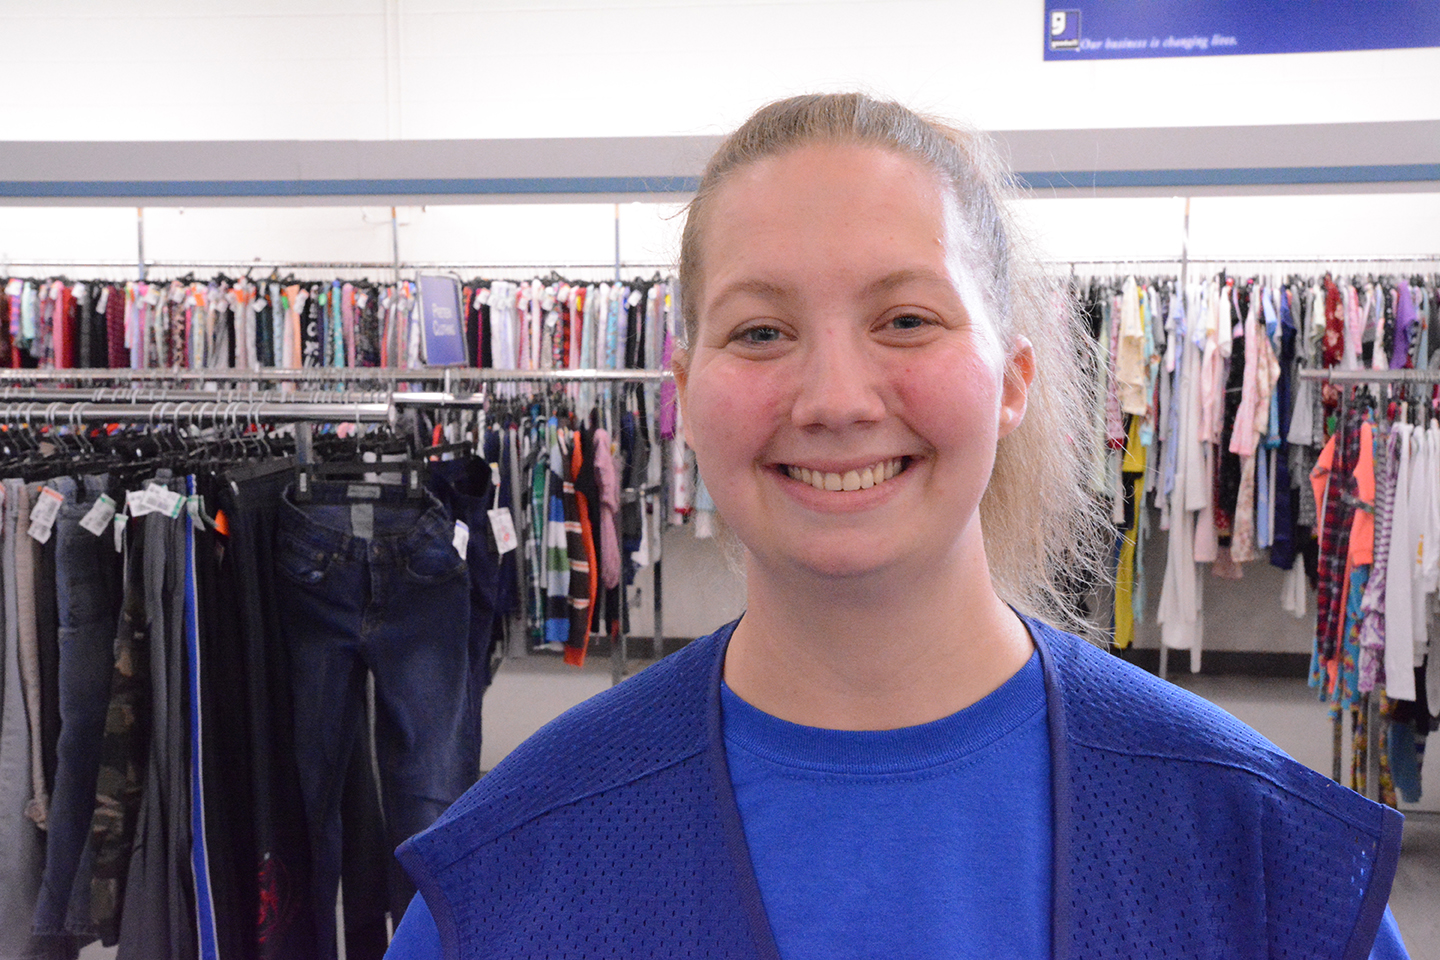 Erica King will soon celebrate four years of sobriety and six months of employment. She says working at Goodwill has given her stability and made her more responsible.